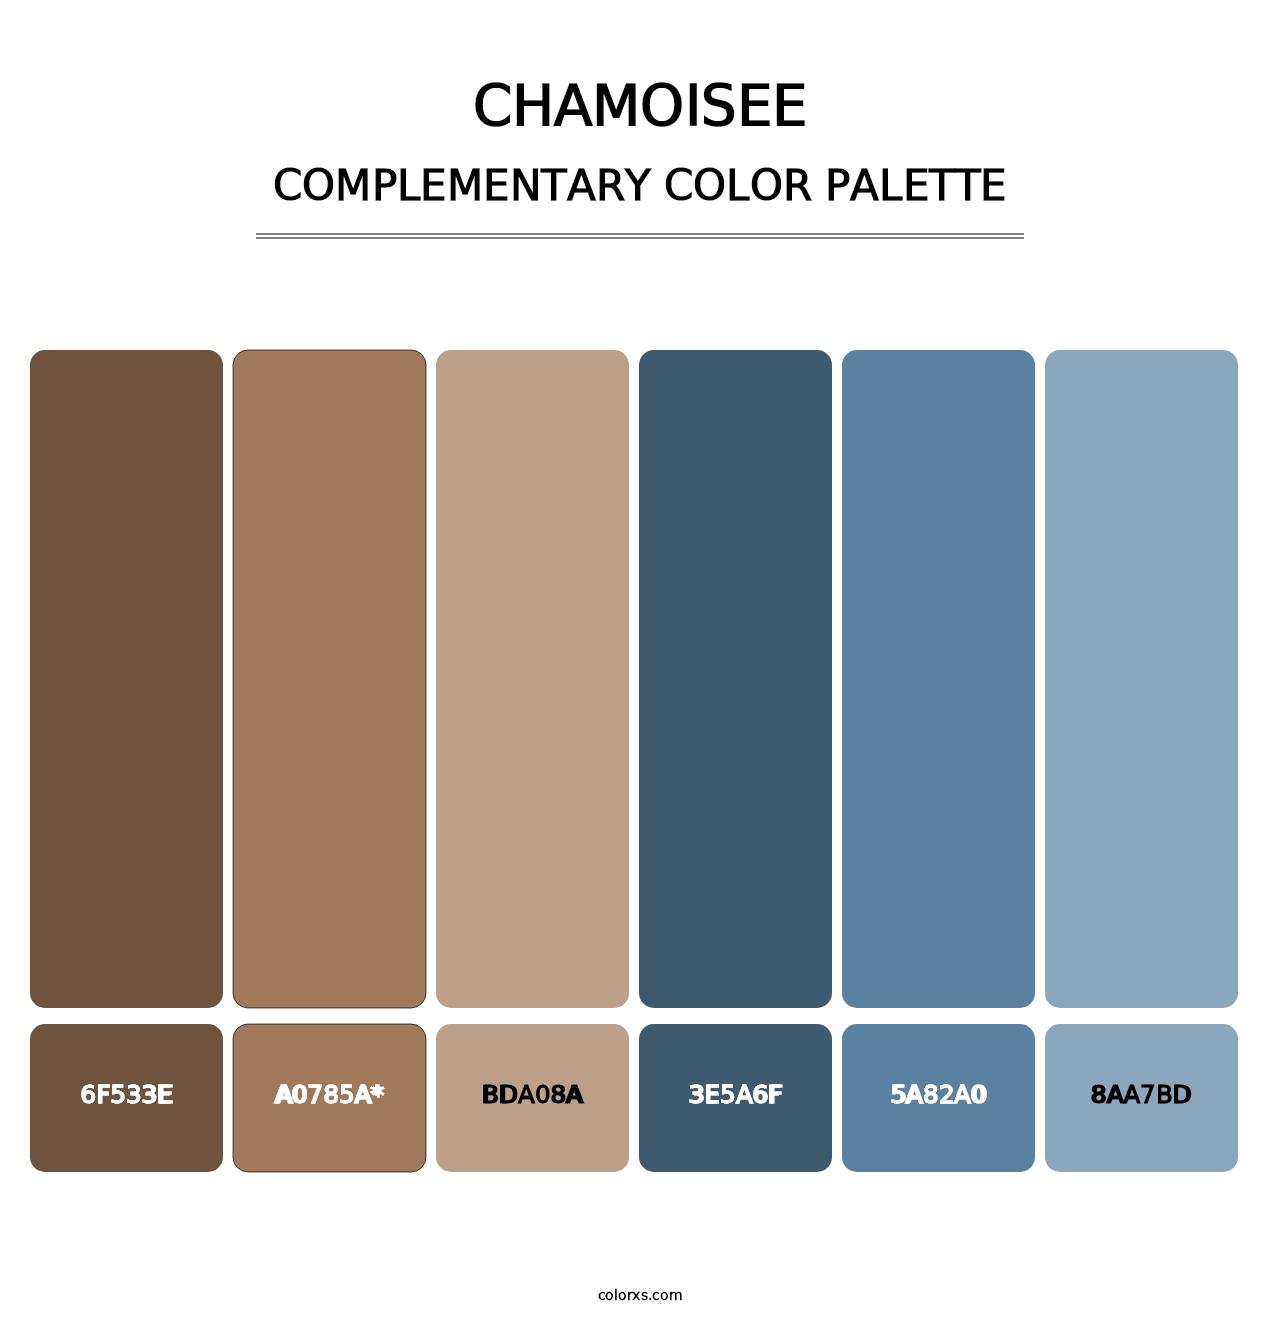 Chamoisee - Complementary Color Palette